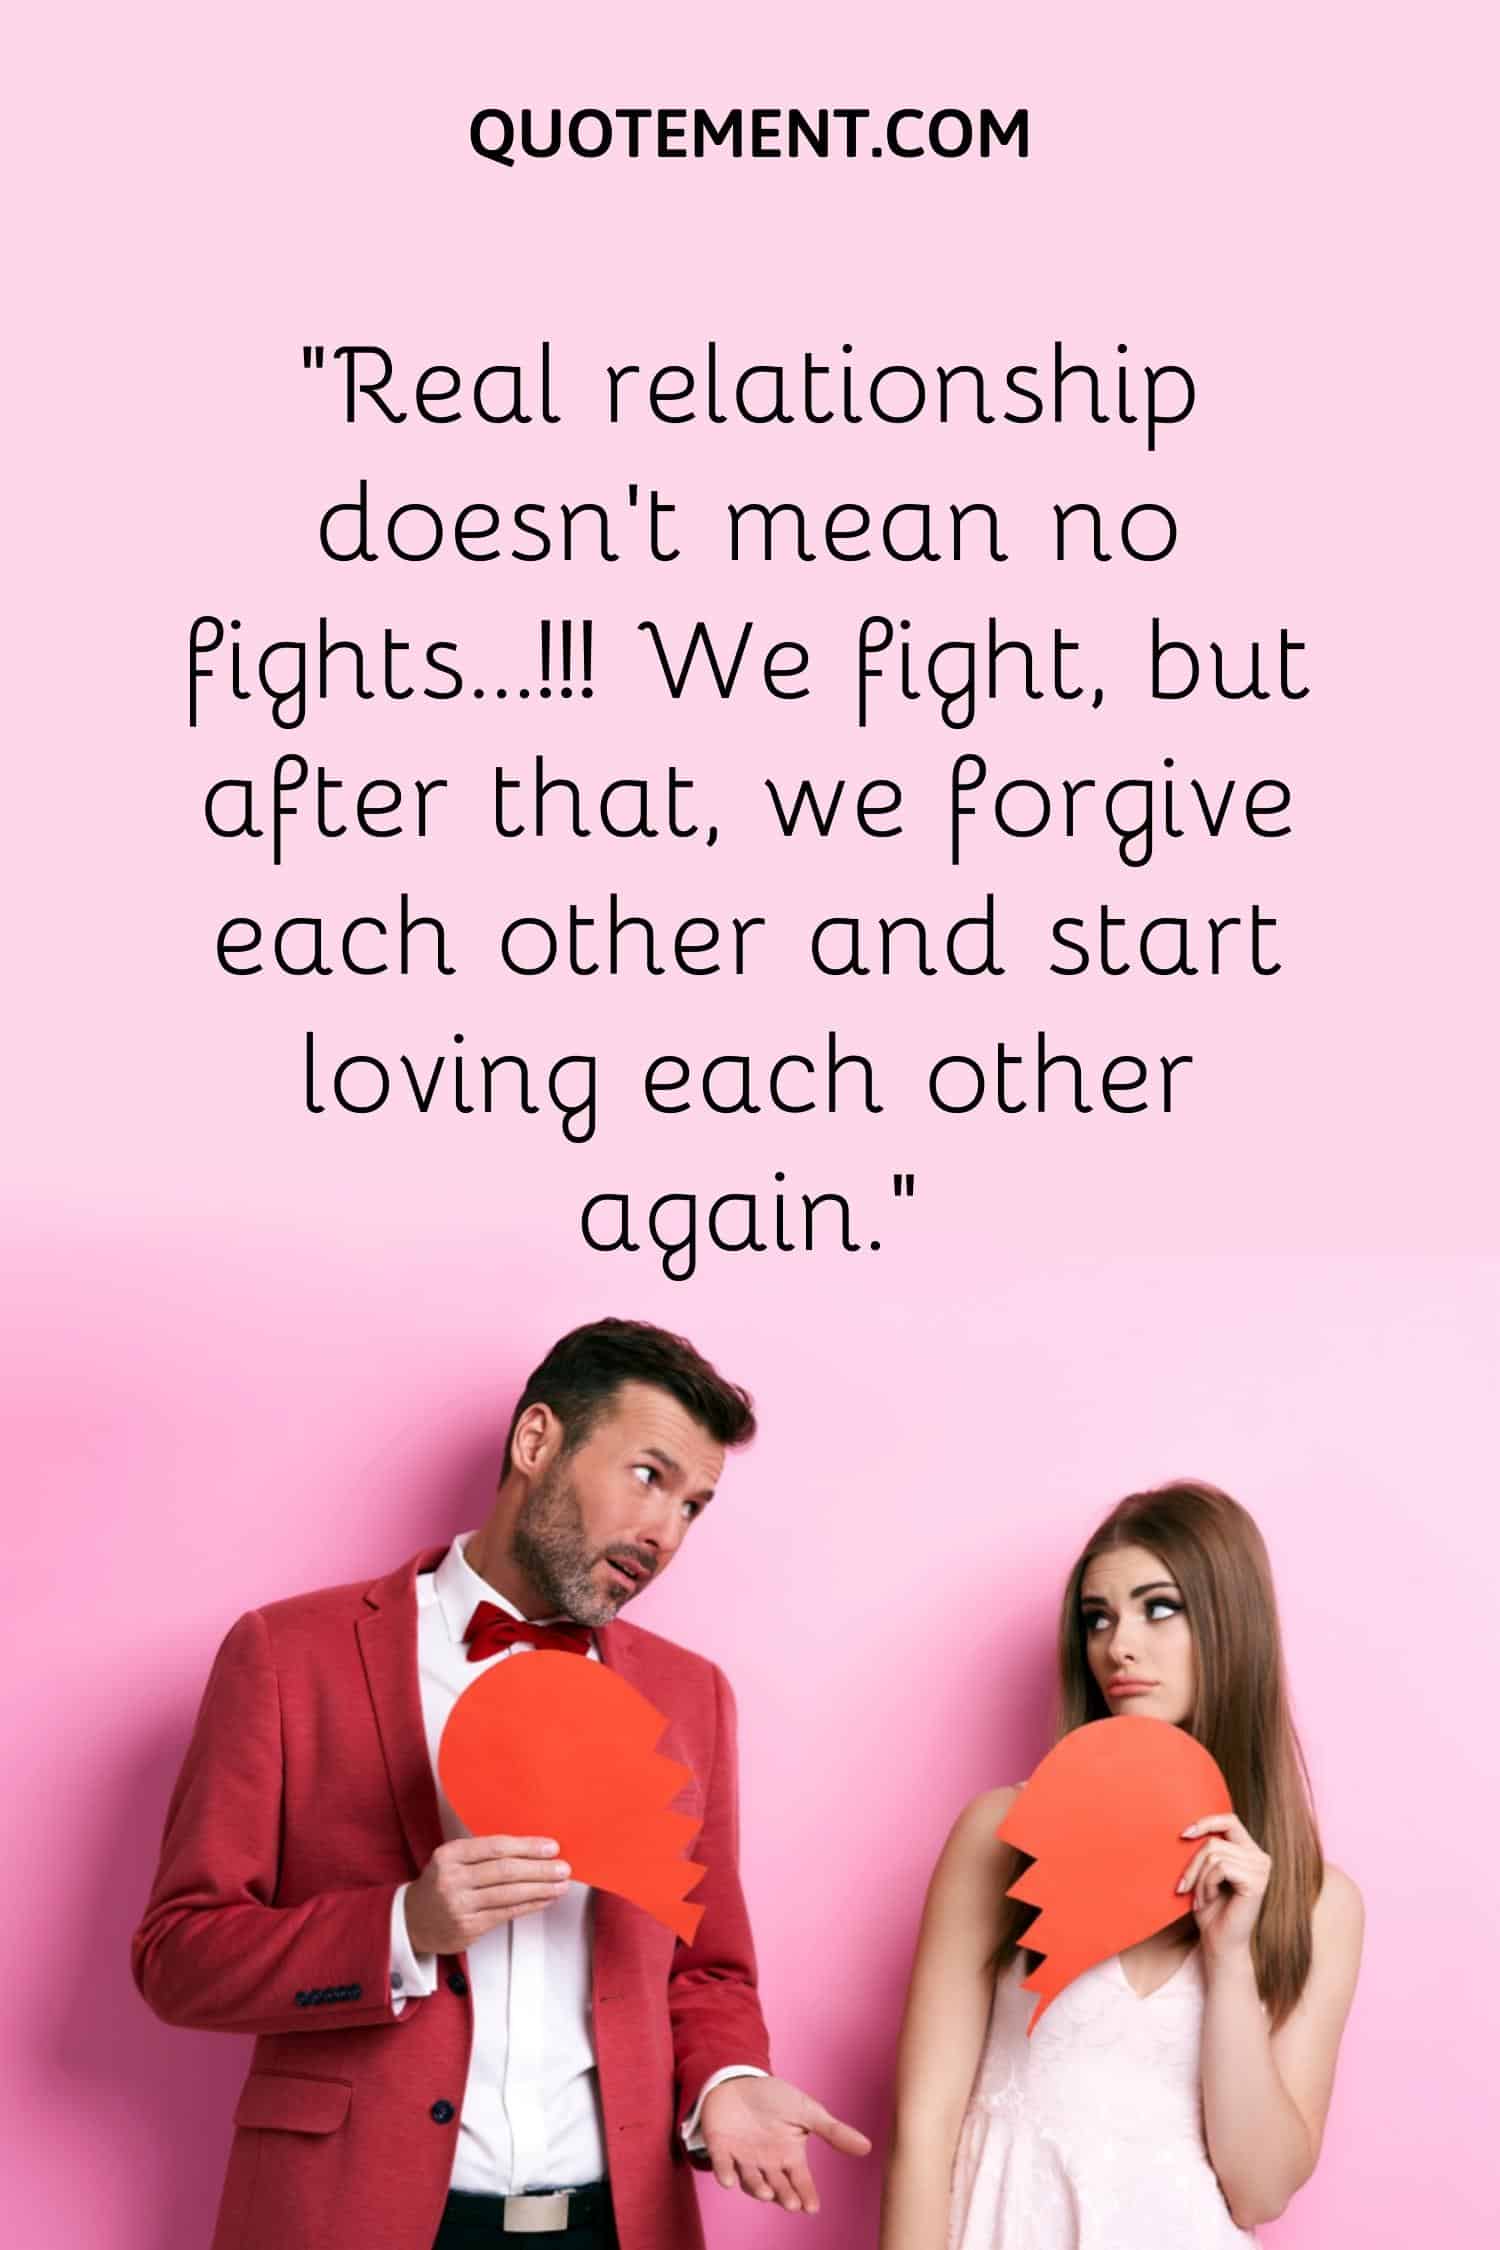 “Real relationship doesn’t mean no fights…!!! We fight, but after that, we forgive each other and start loving each other again.”